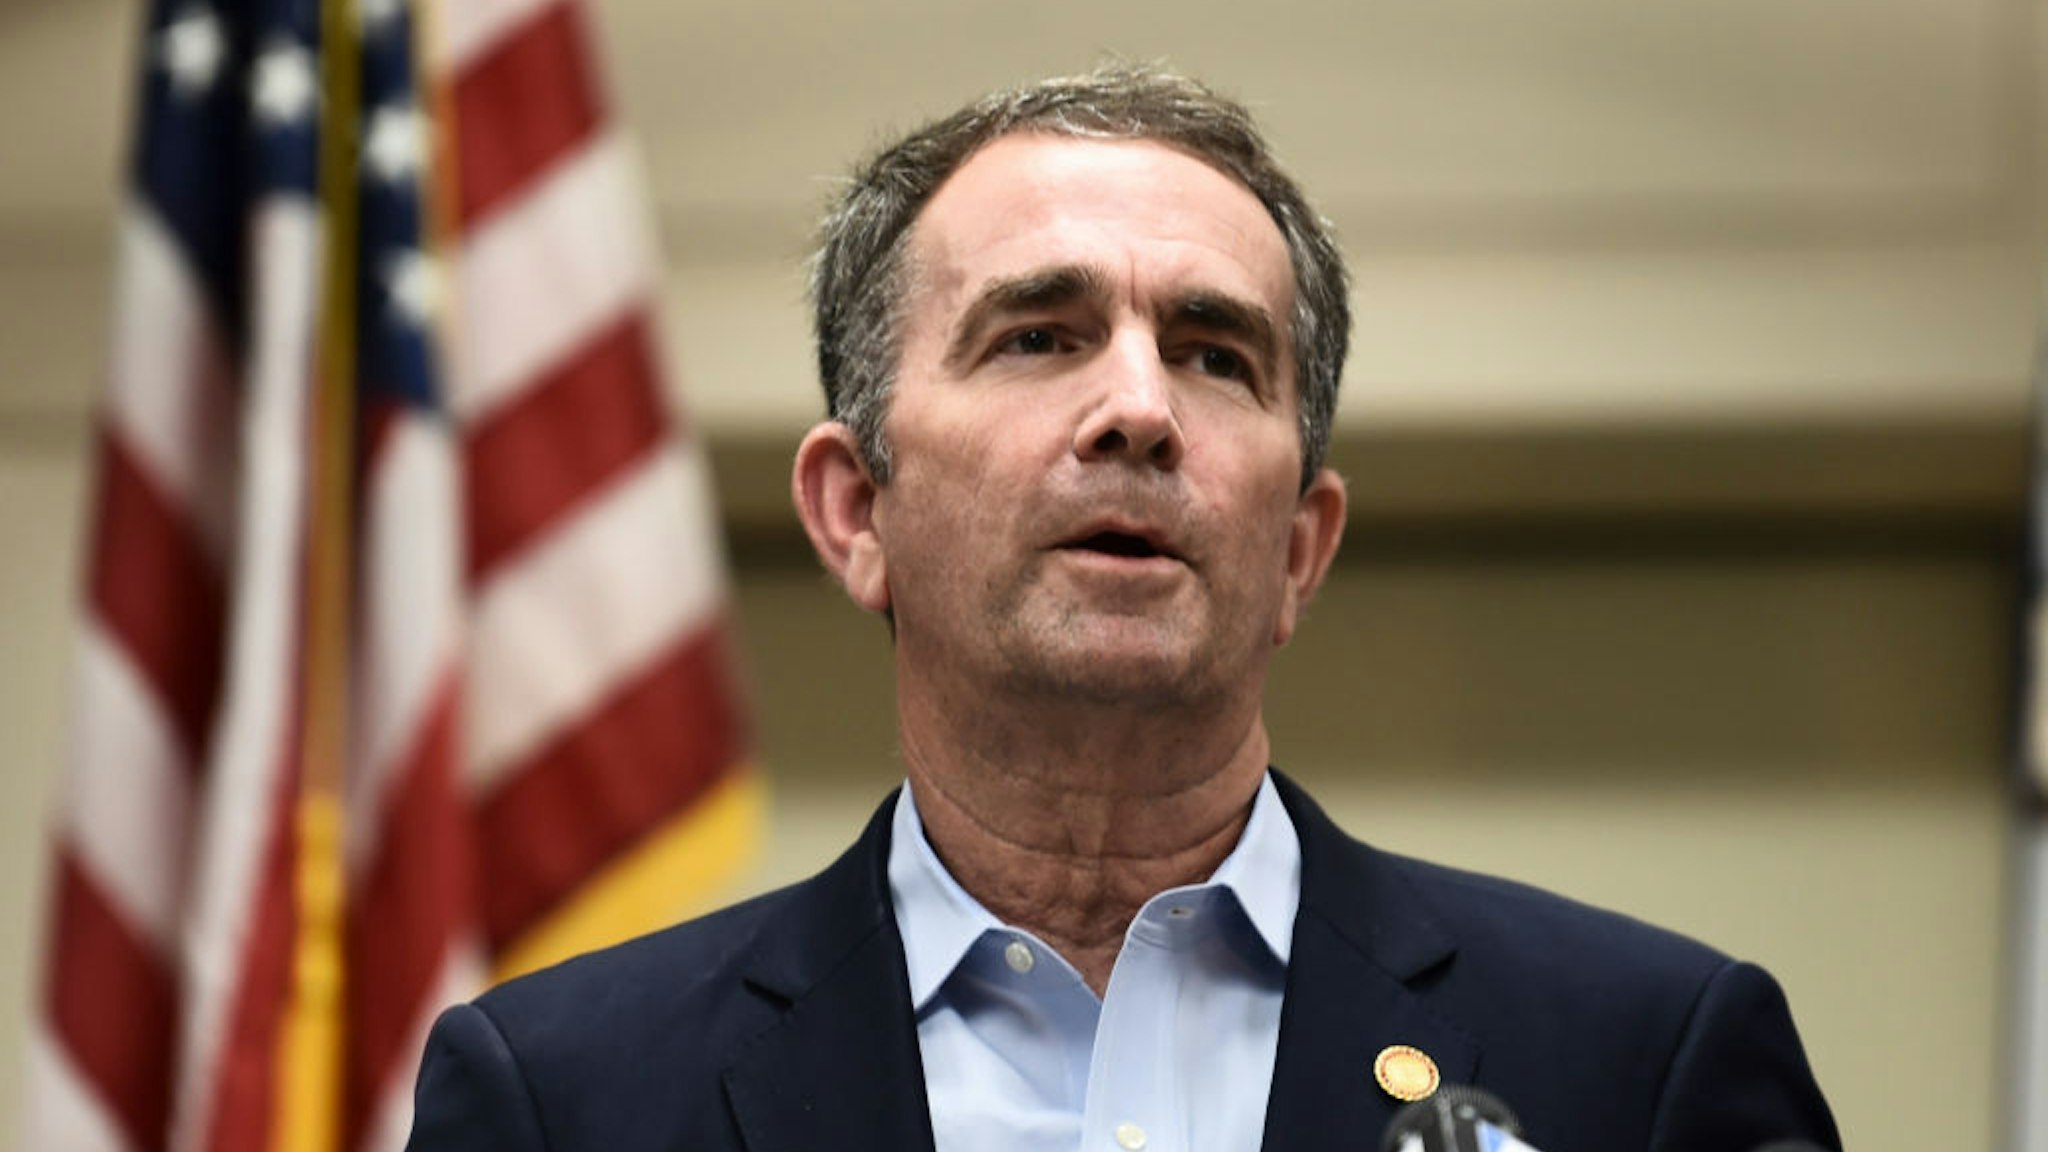 Virginia Governor Ralph Northam speaks to the press about a mass shooting on June 1, 2019, in Virginia, Beach, Virginia. - A municipal employee sprayed gunfire "indiscriminately" in a government building complex on May 31, 2019, police said, killing 12 people and wounding four in the latest mass shooting to rock the US. (Photo by Eric BARADAT / AFP) (Photo credit should read ERIC BARADAT/AFP via Getty Images)